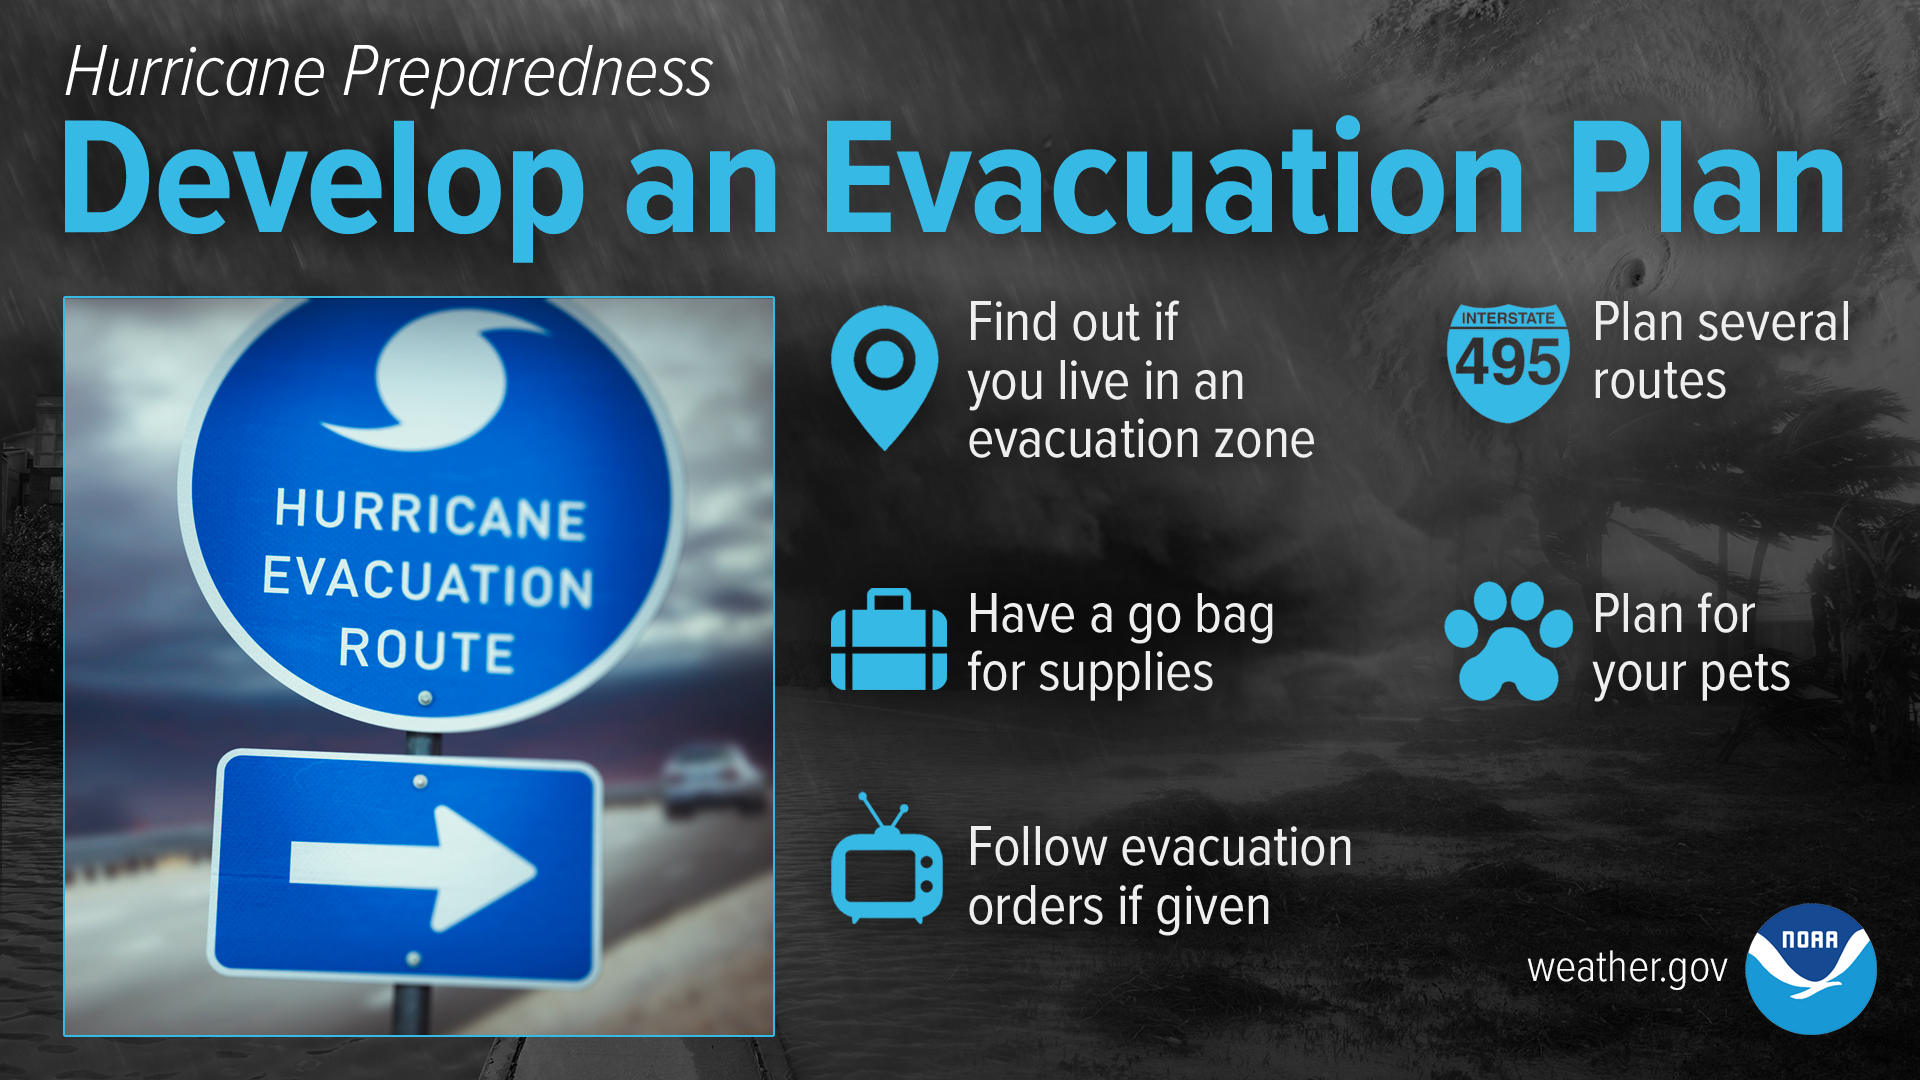 Hurricane Preparedness: Develop An Evacuation Plan. Find out today if you live in a hurricane evacuation zone and identify trusted sources for receiving evacuation orders. Plan for multiple options on where to go and how to get there. Have a go bag for supplies and a plan for your pets. Be prepared to leave immediately if ordered to evacuate.